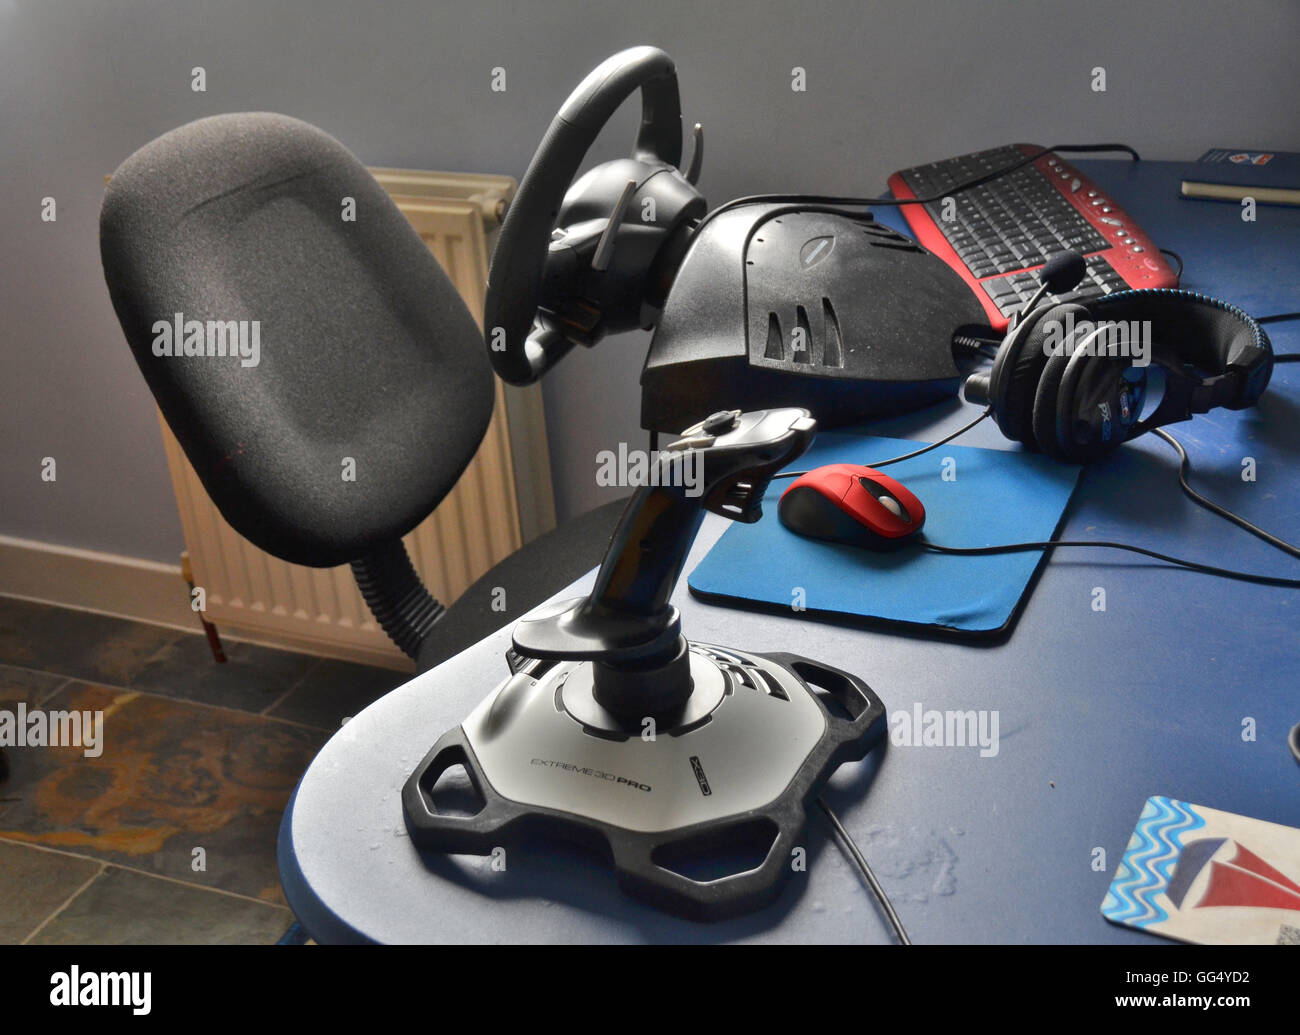 gaming rig, station, including accessories connected to the  PC,  such as joystick,headphones, mouse, keyboard  steering wheel. Stock Photo